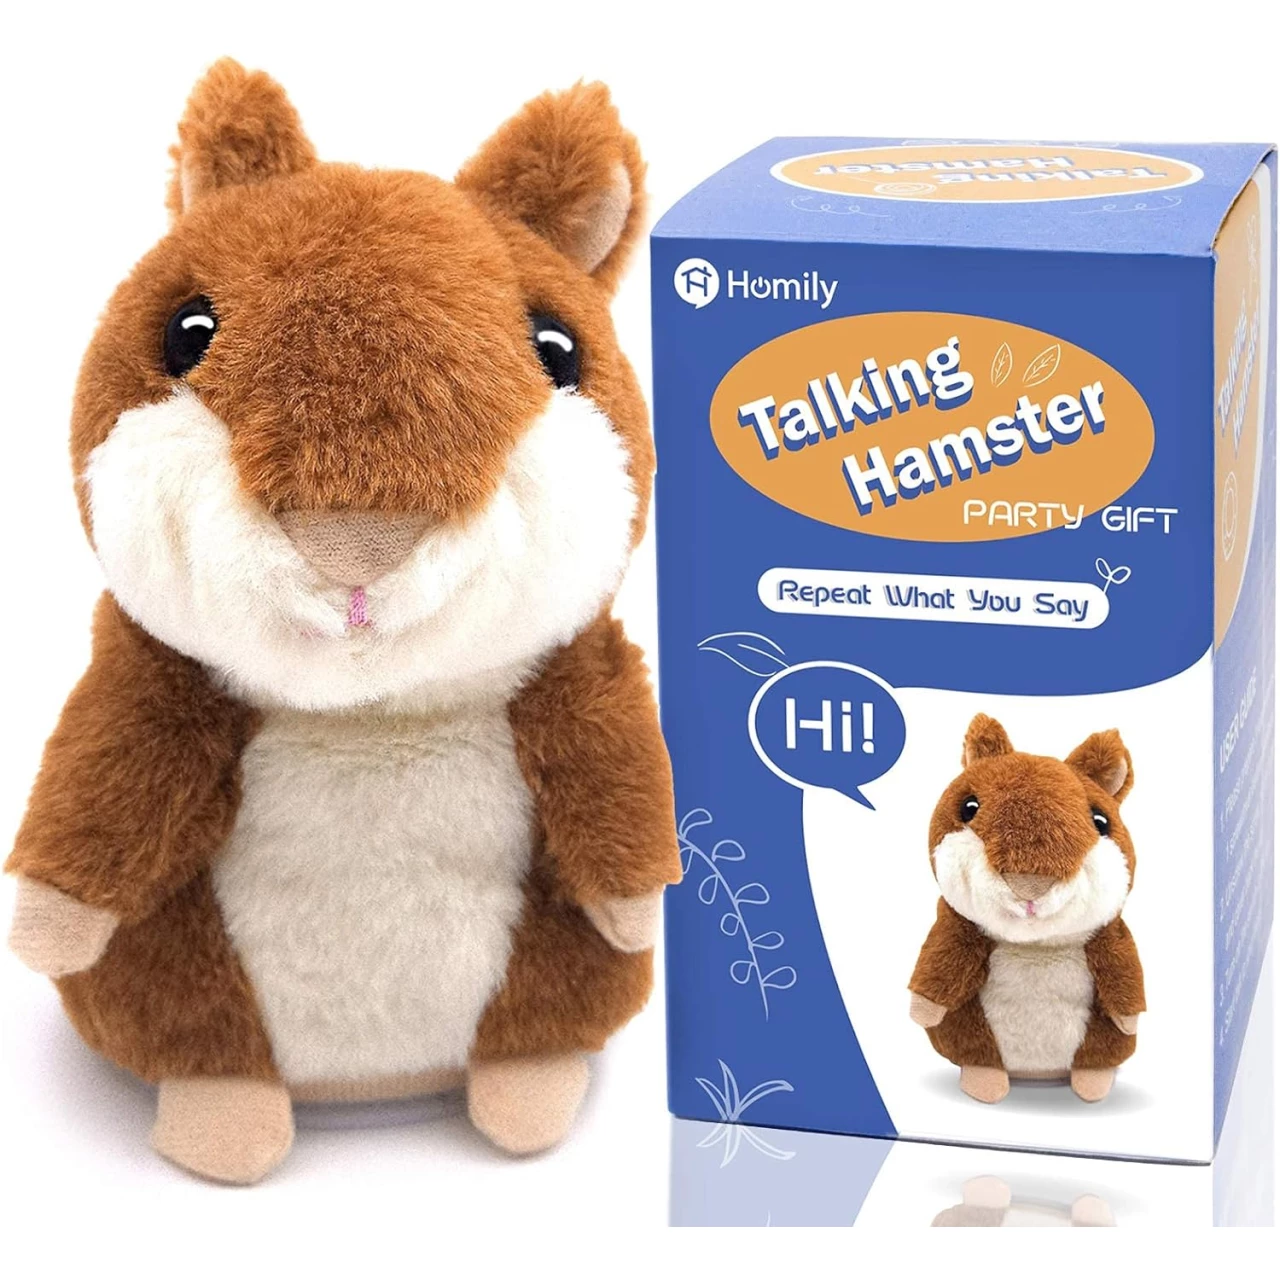 Homily Talking Hamster, Repeats What You Say Plush Animal Toy Electronic Hamster Mouse for Boys, Girls &amp; Baby Gift